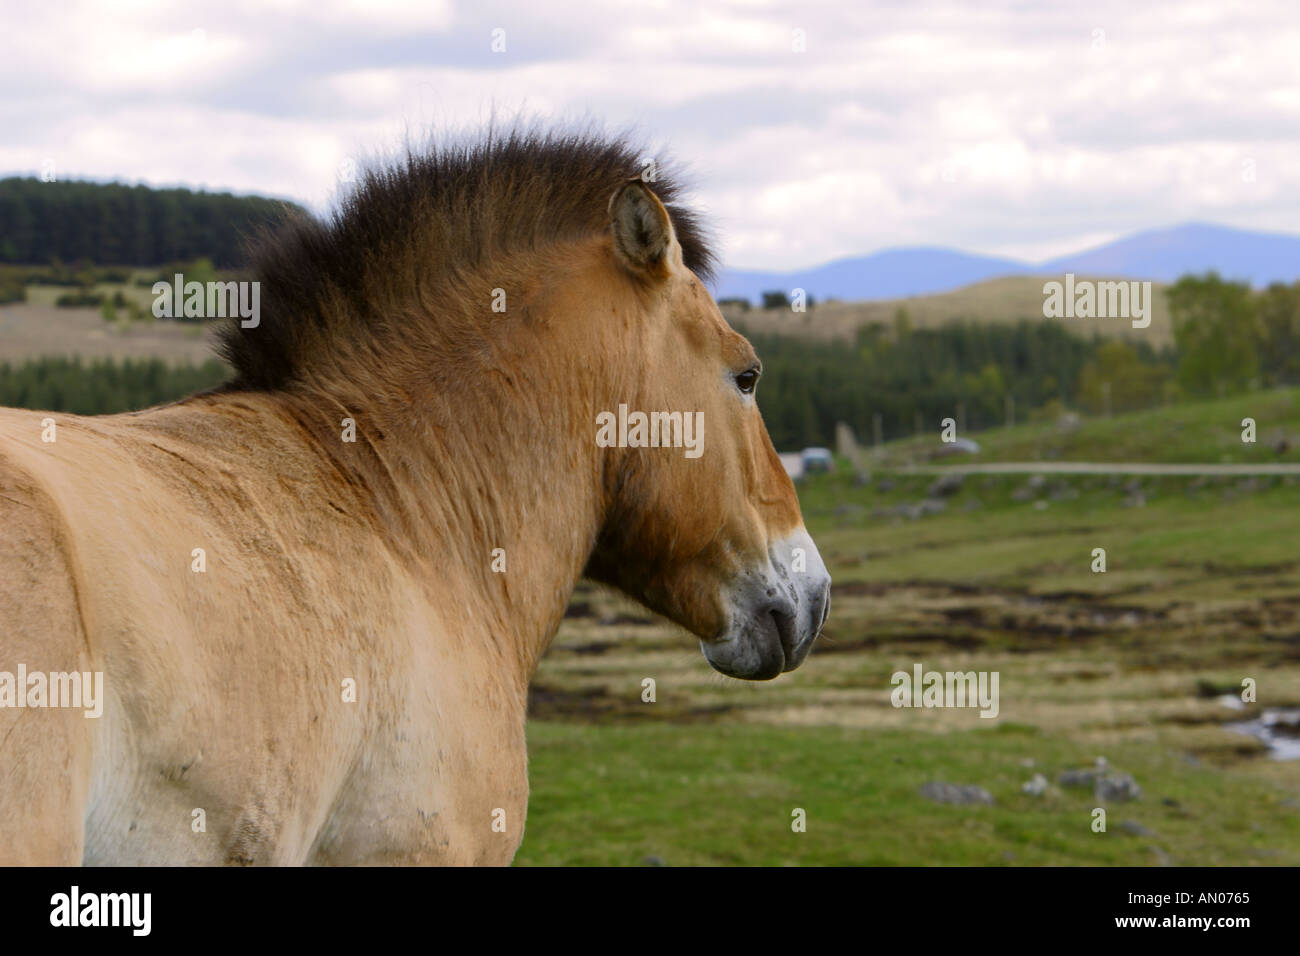 Przewalskis horse at the highland wildlife park Aviemoor Scotland which is part of Edinburgh Zoo Stock Photo